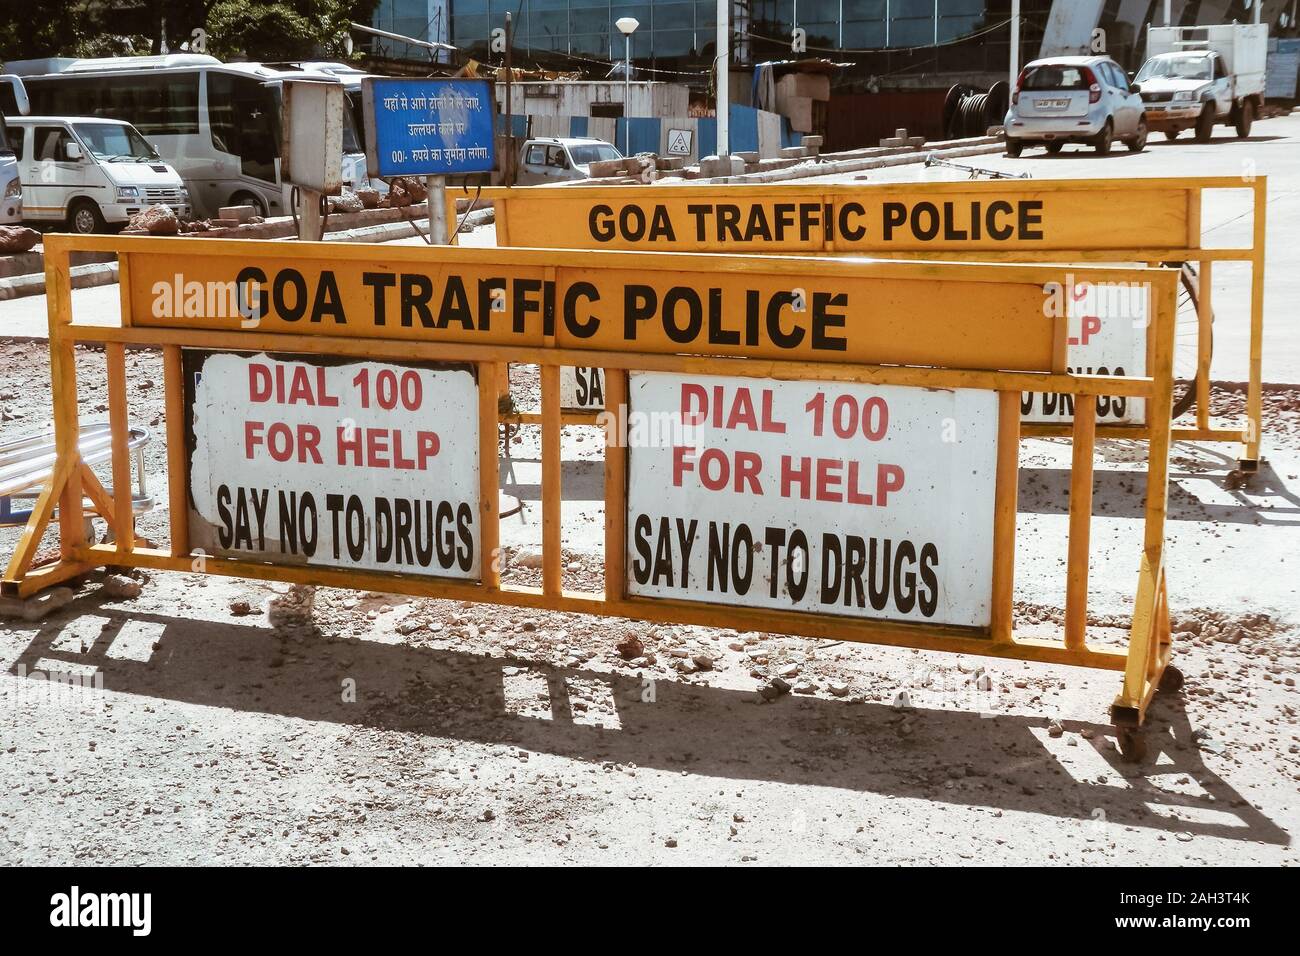 Goa, India - October 12, 2013: Goa police signs against drug use welcome the visitors at Goa airport. Stock Photo